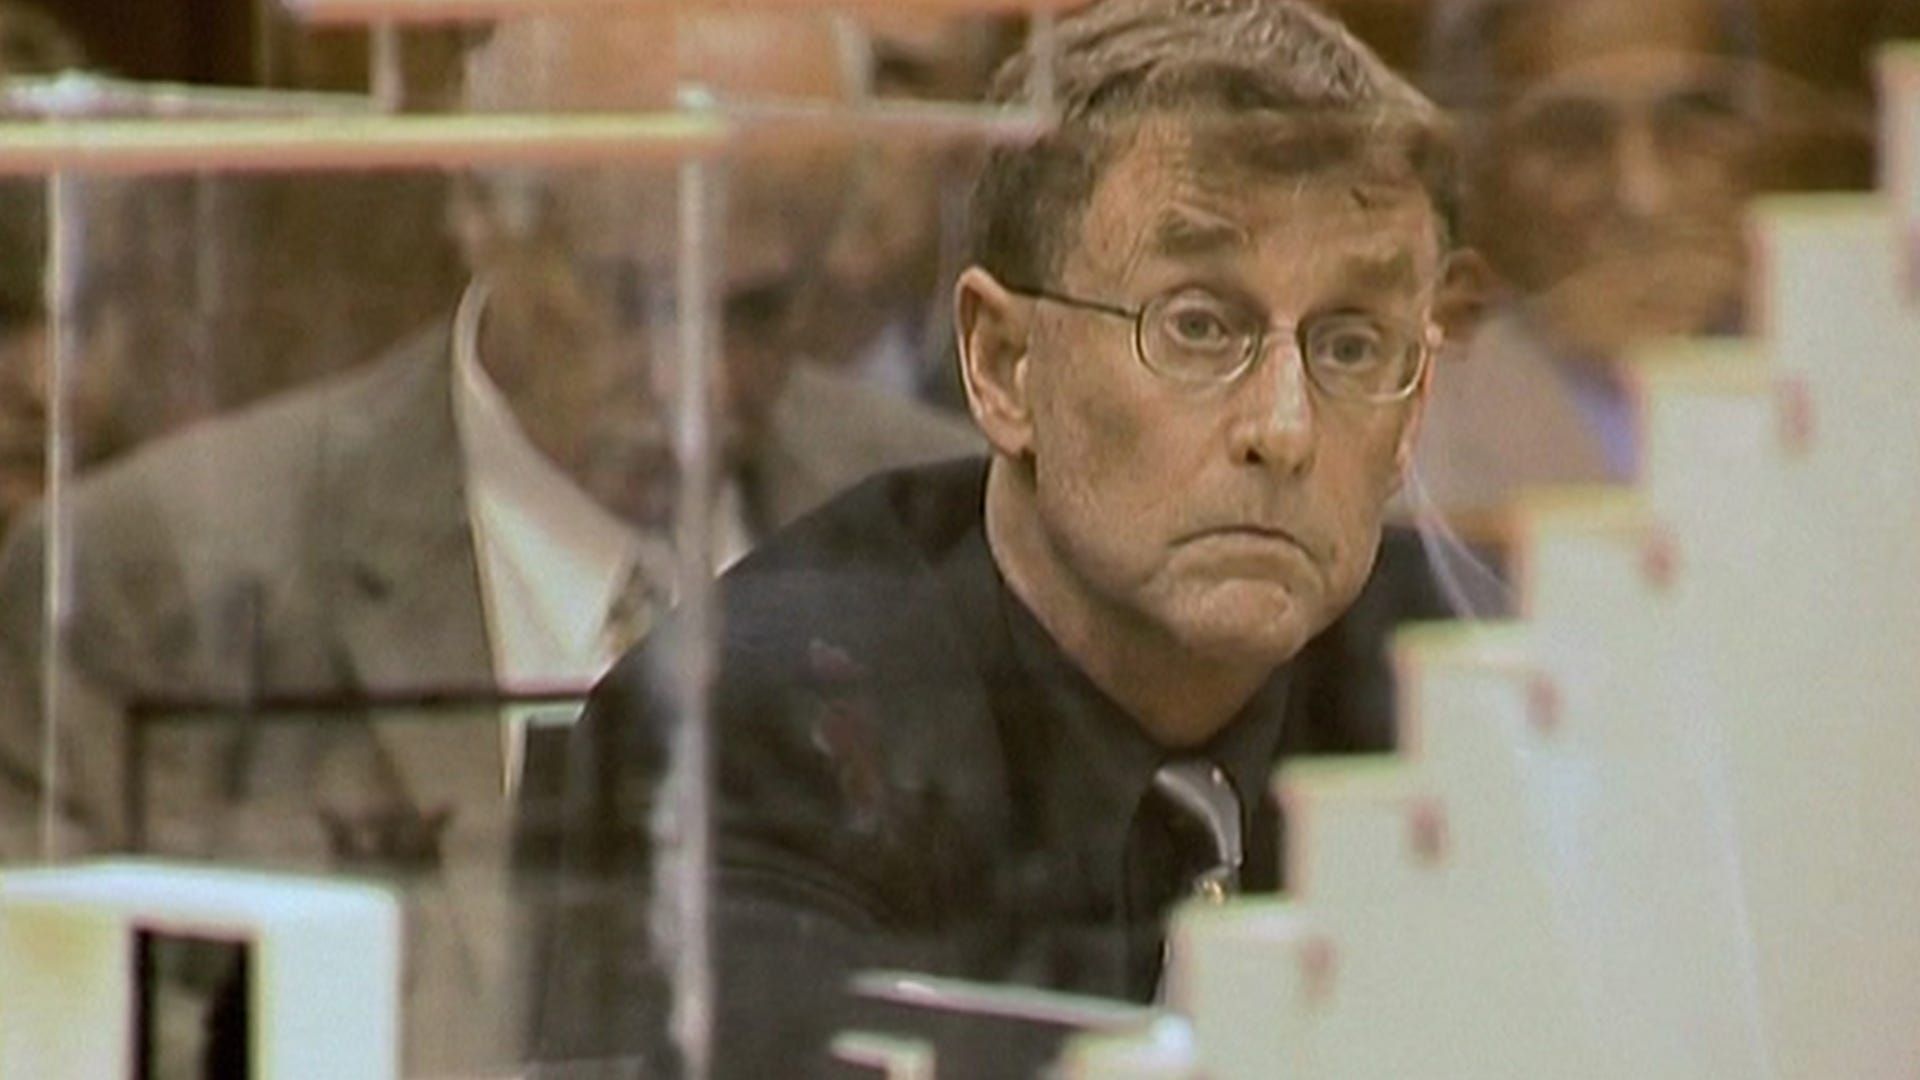 Michael Peterson, The Staircase